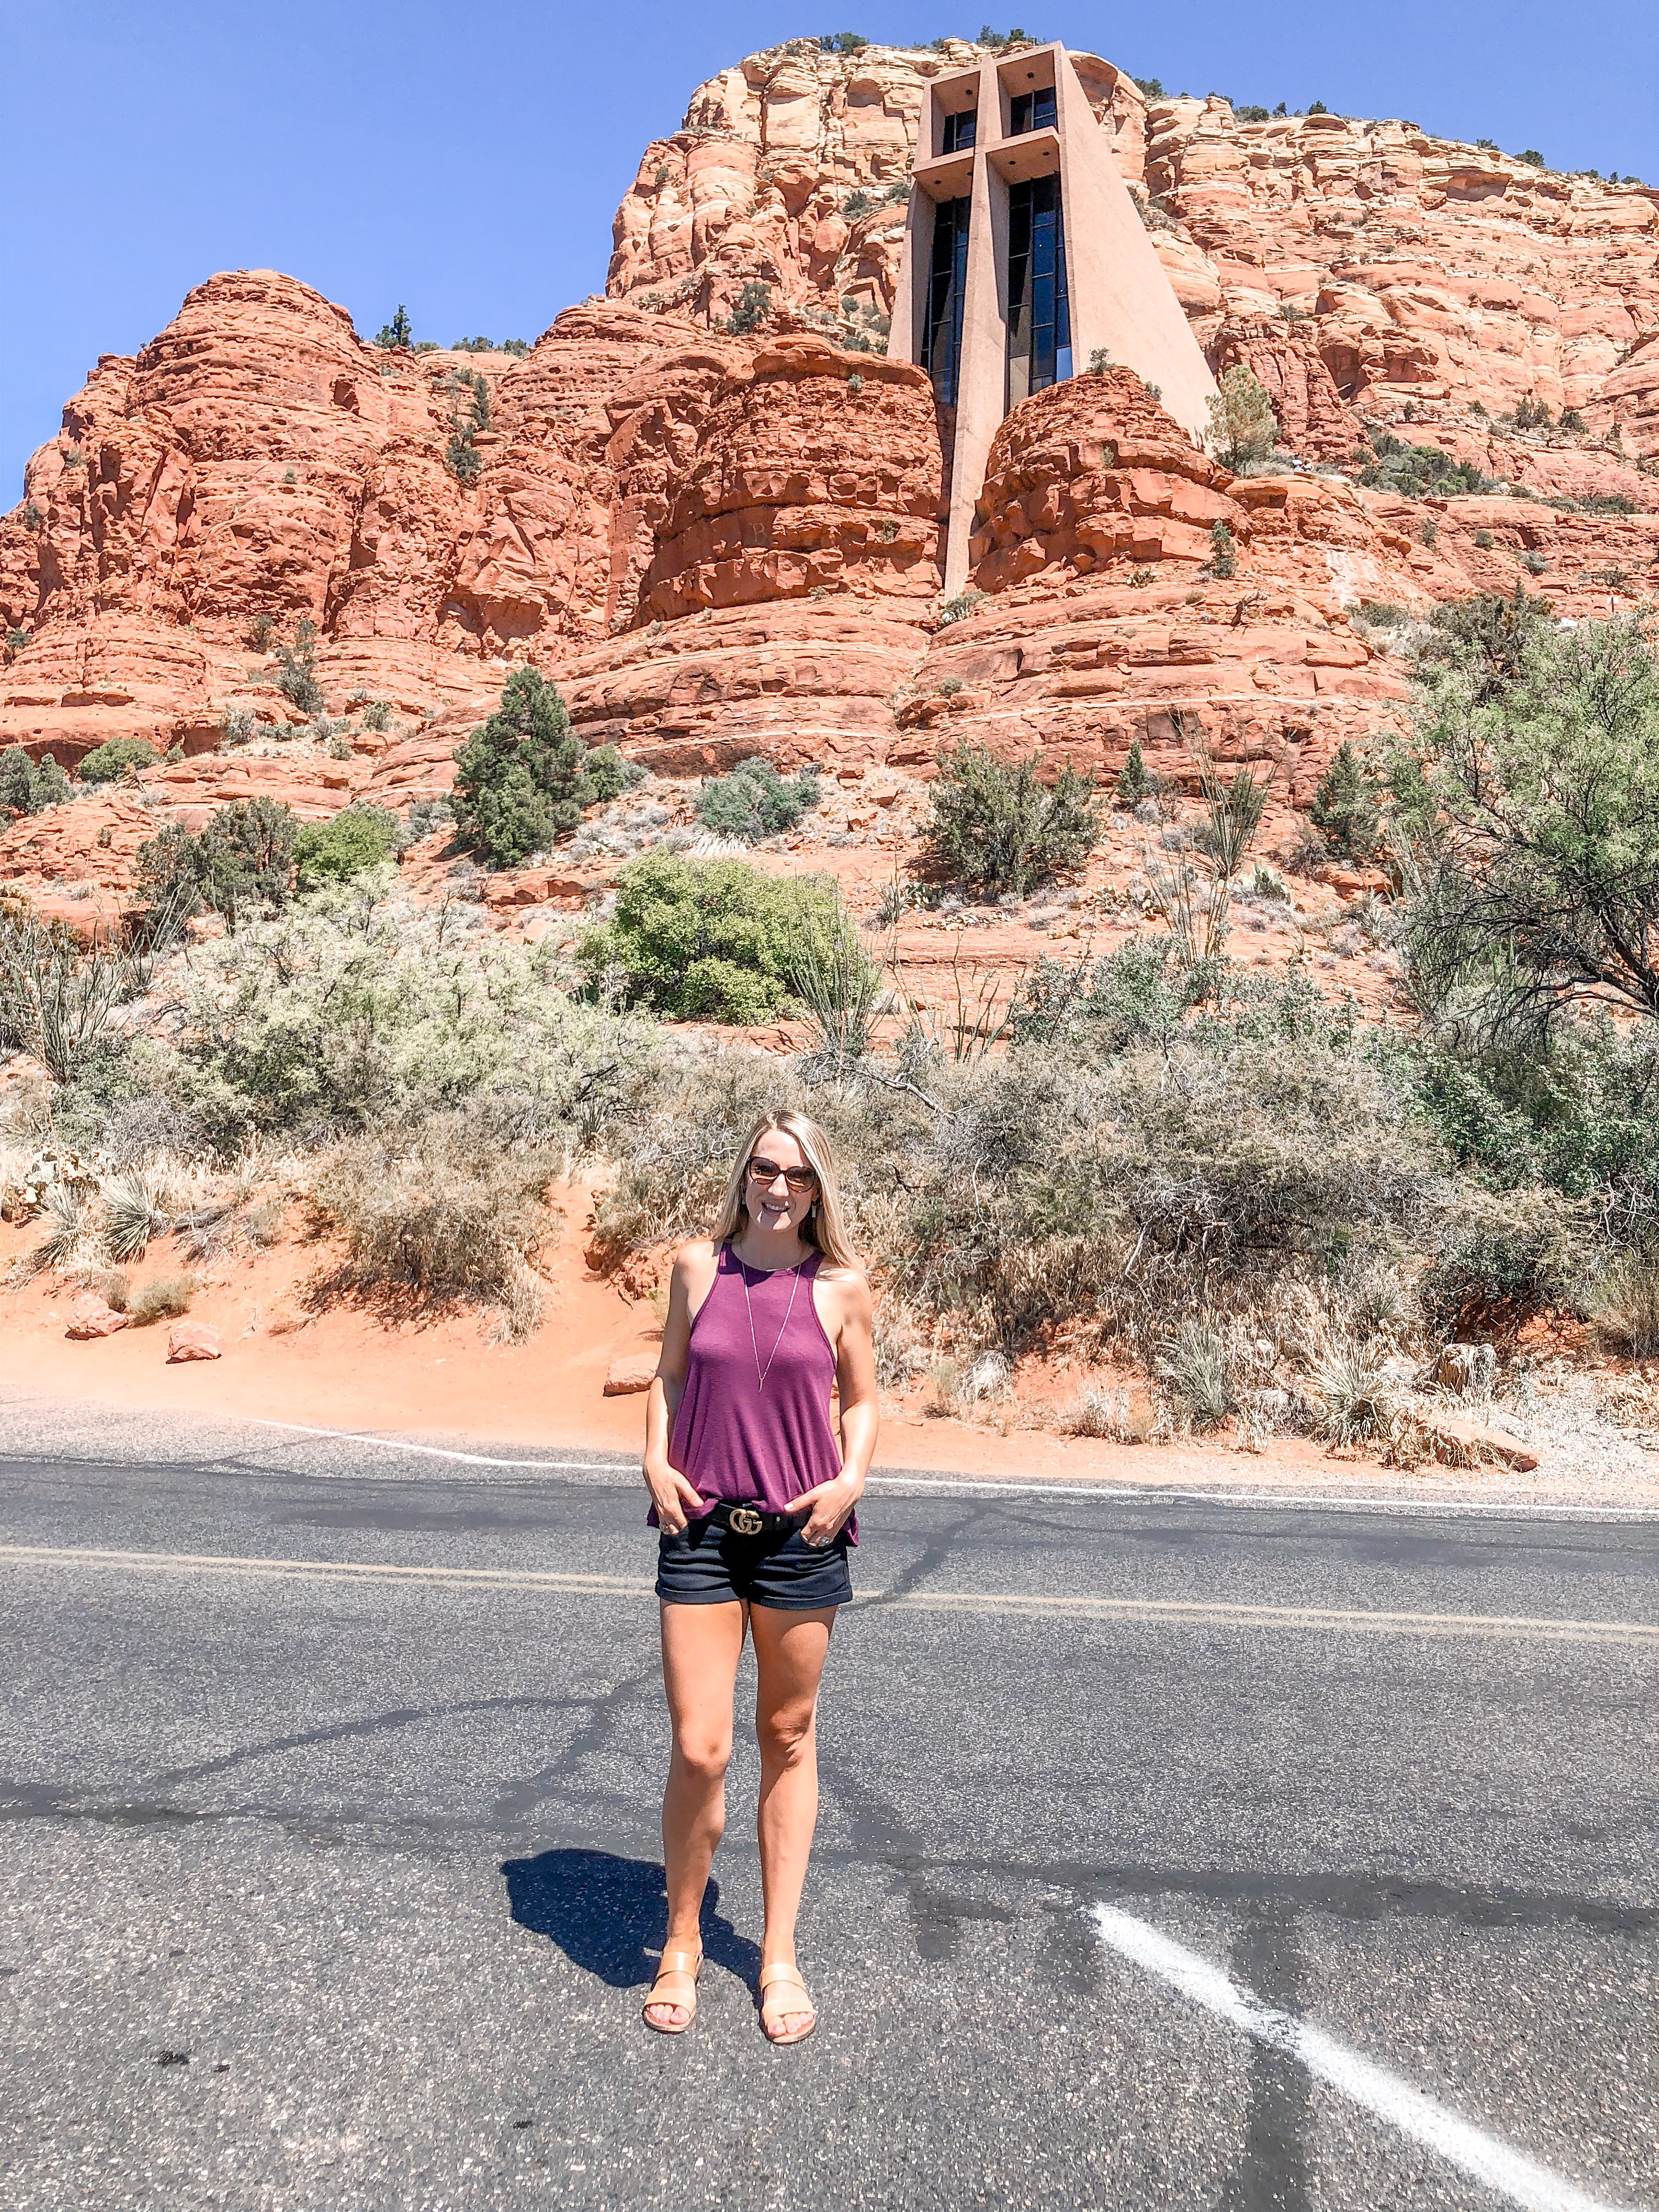 The Best Travel Guide to Sedona